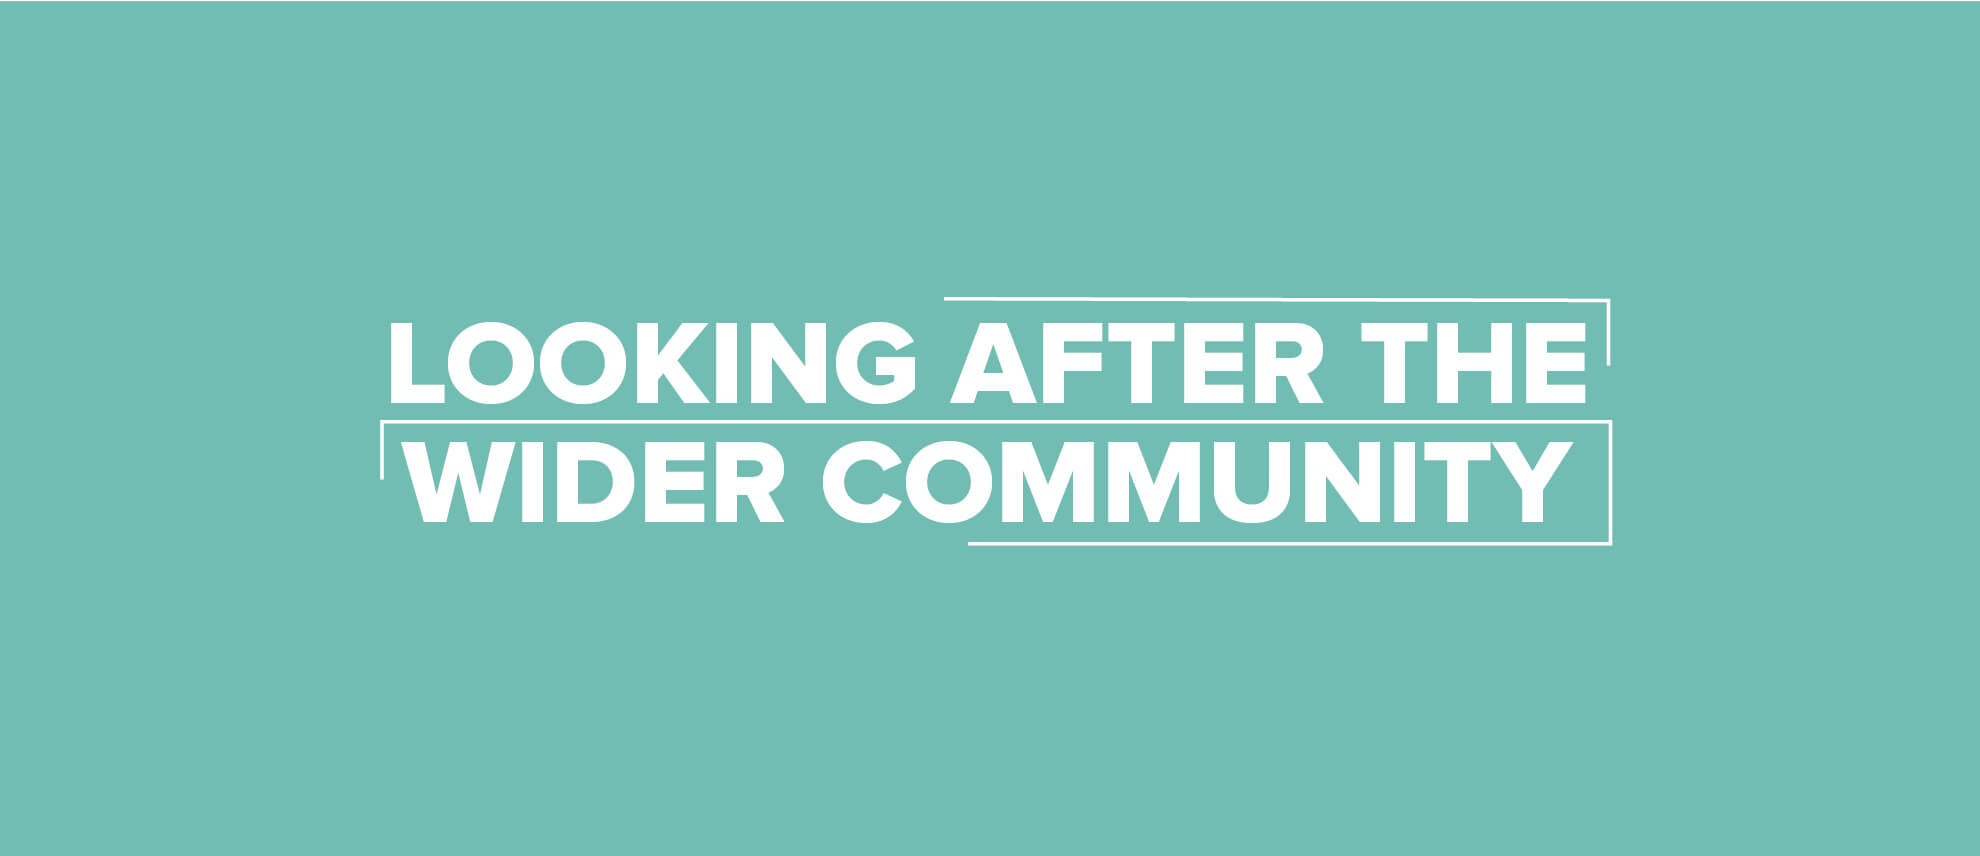 Looking After the Wider Community